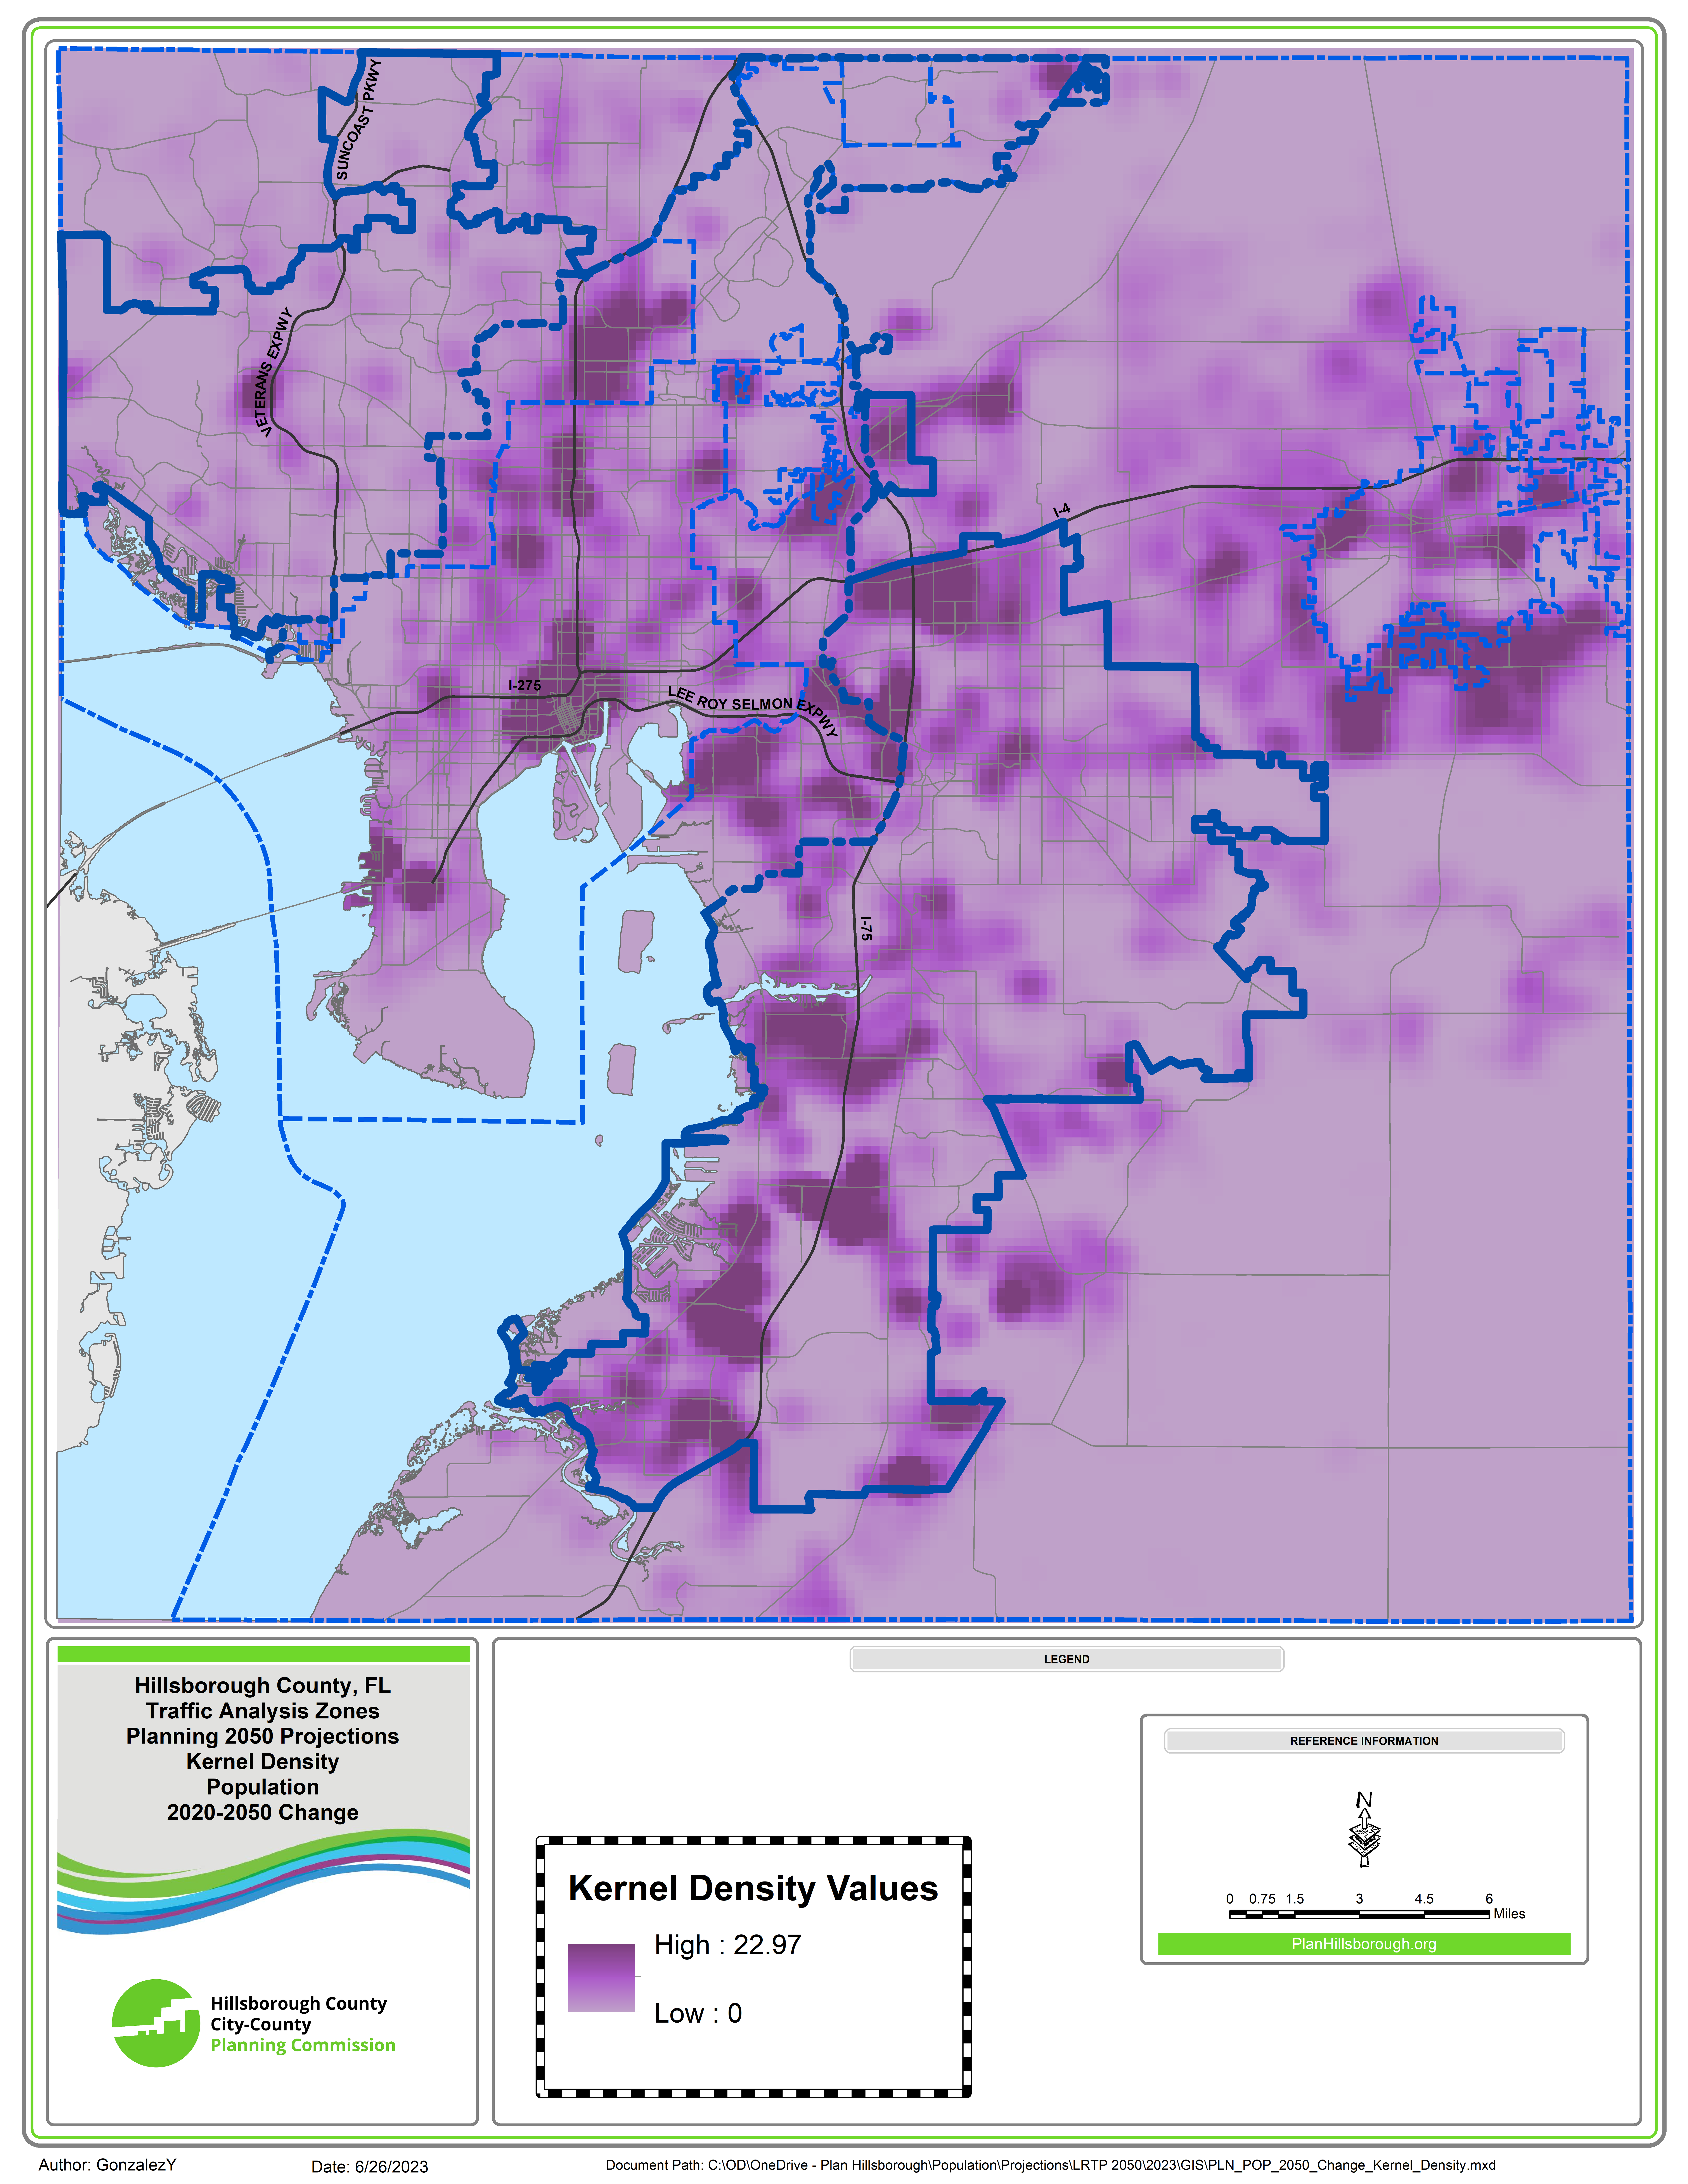 Map shows Kernel Density of new persons per acre through 2050. Darker purple means more new persons. Most new residents are will be moving to areas like South Plant City, Downtown Tampa, Brandon, etc.